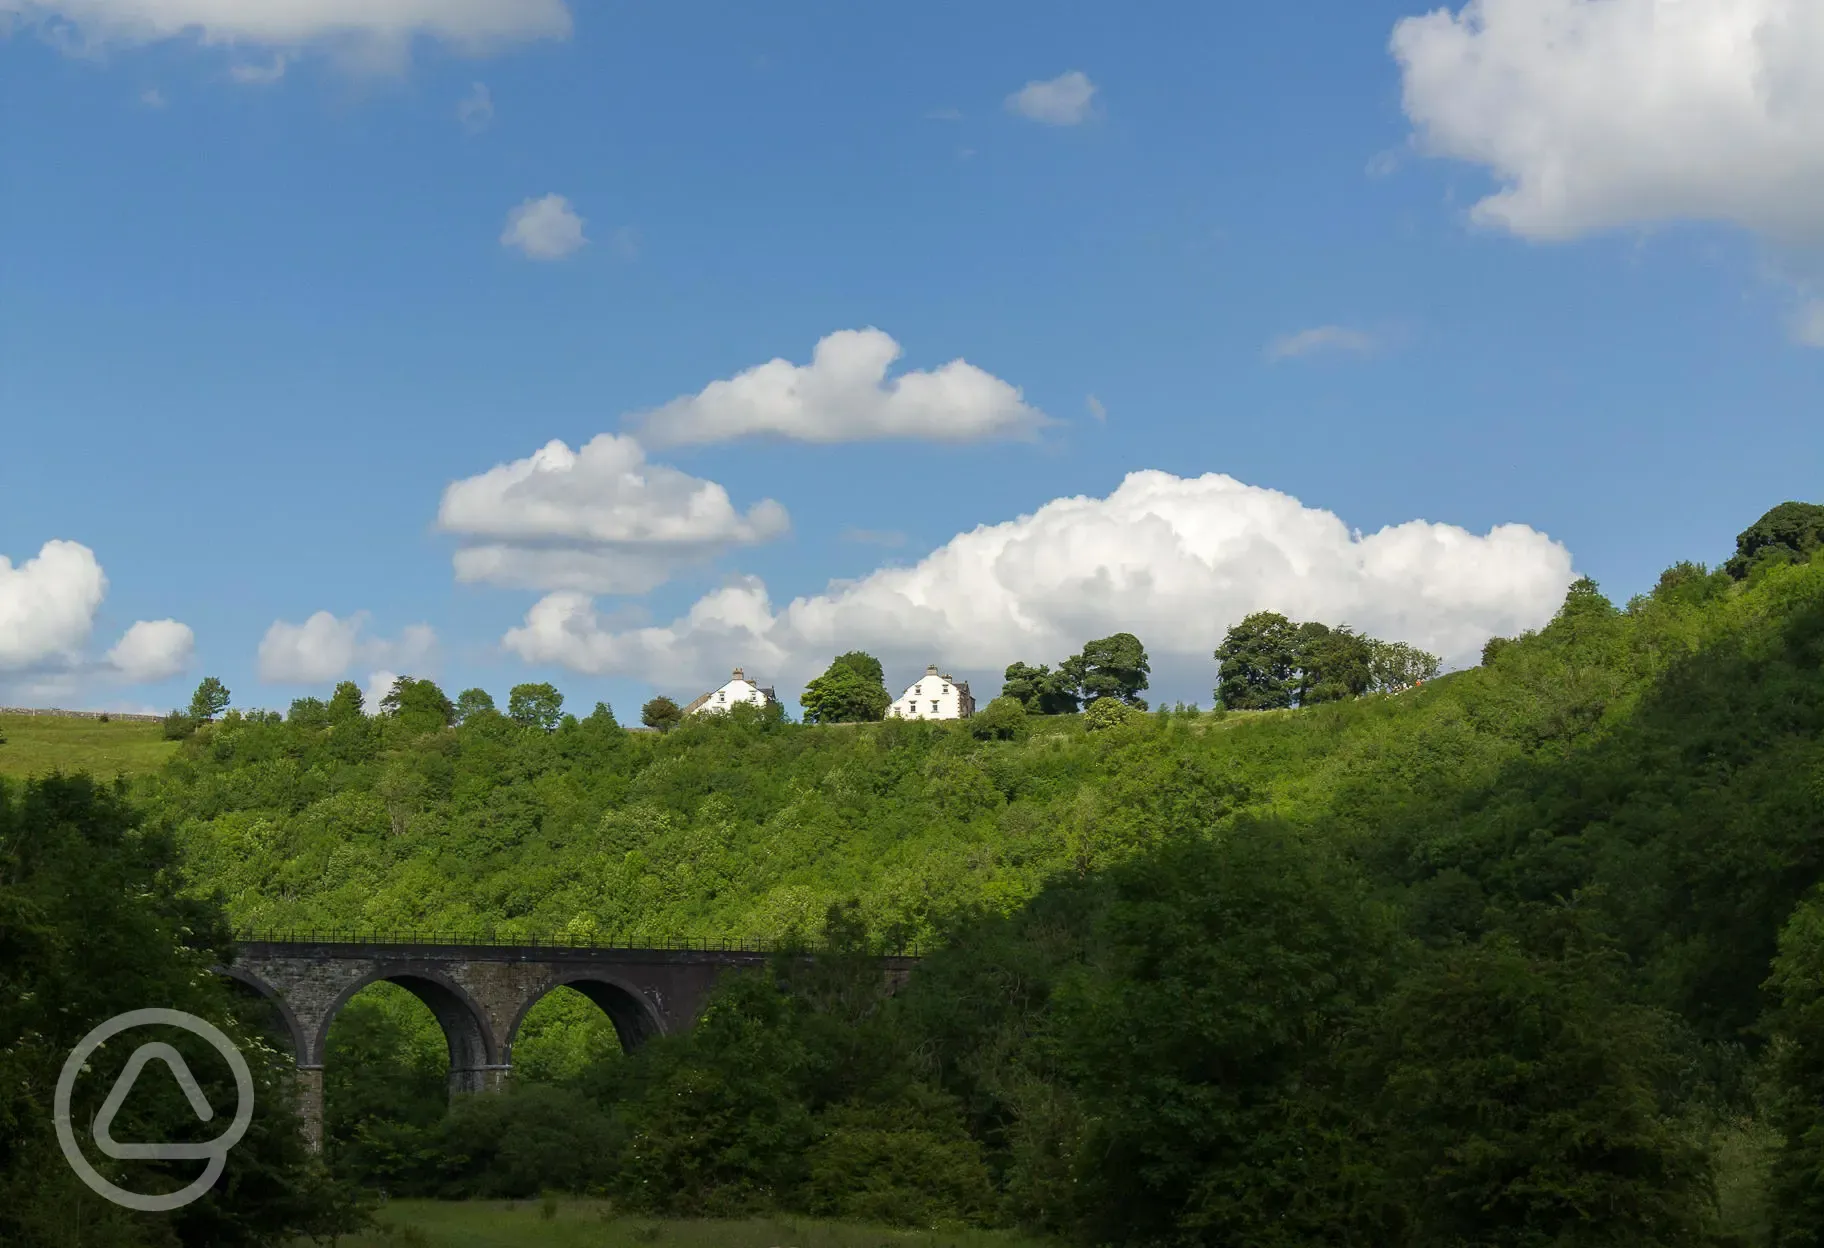 The Monsal Trail viaduct from Monsal Dale